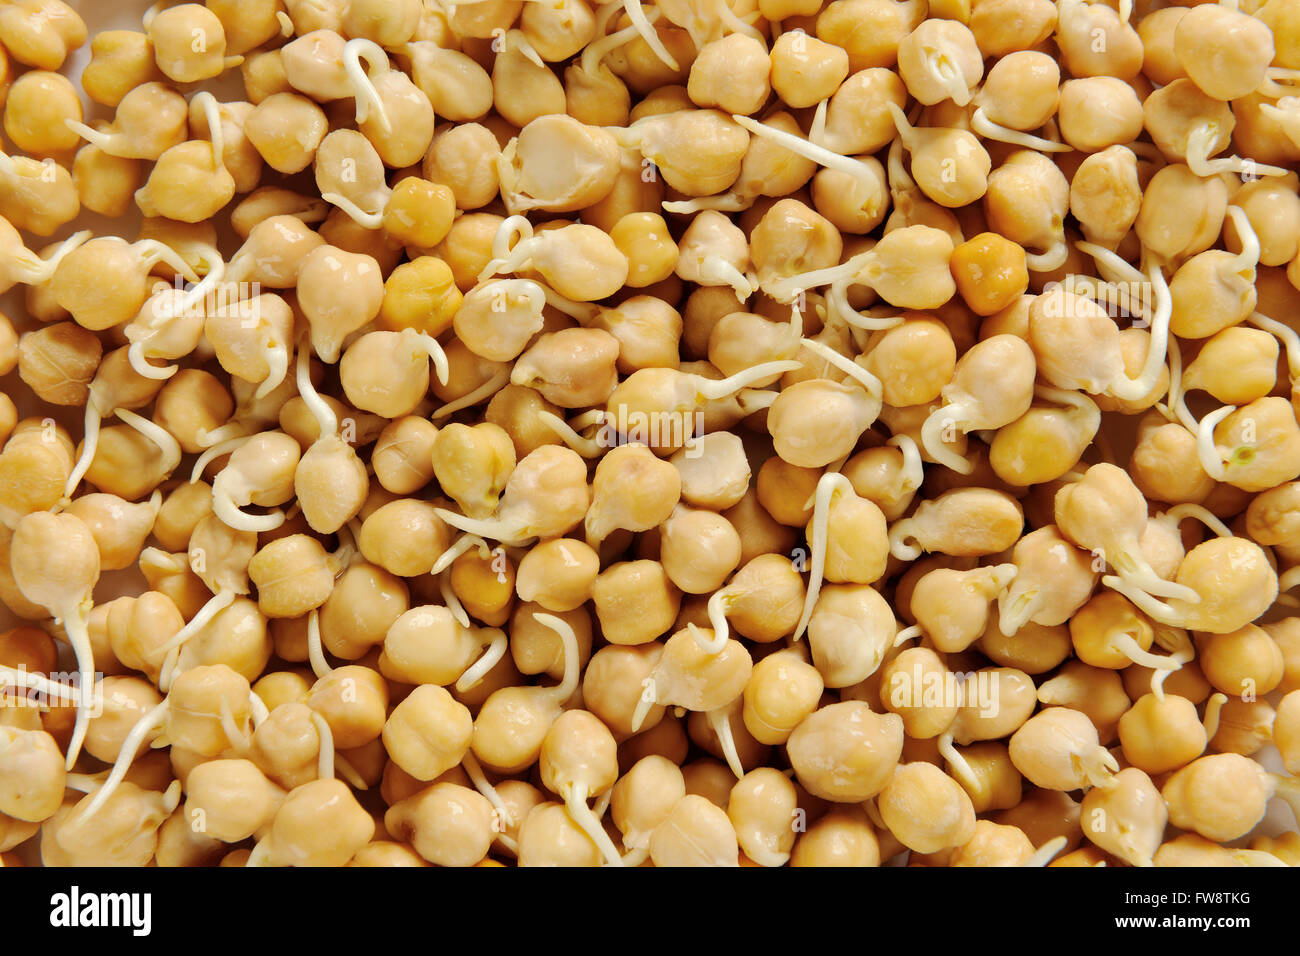 Sprouted chick peas - full frame Stock Photo